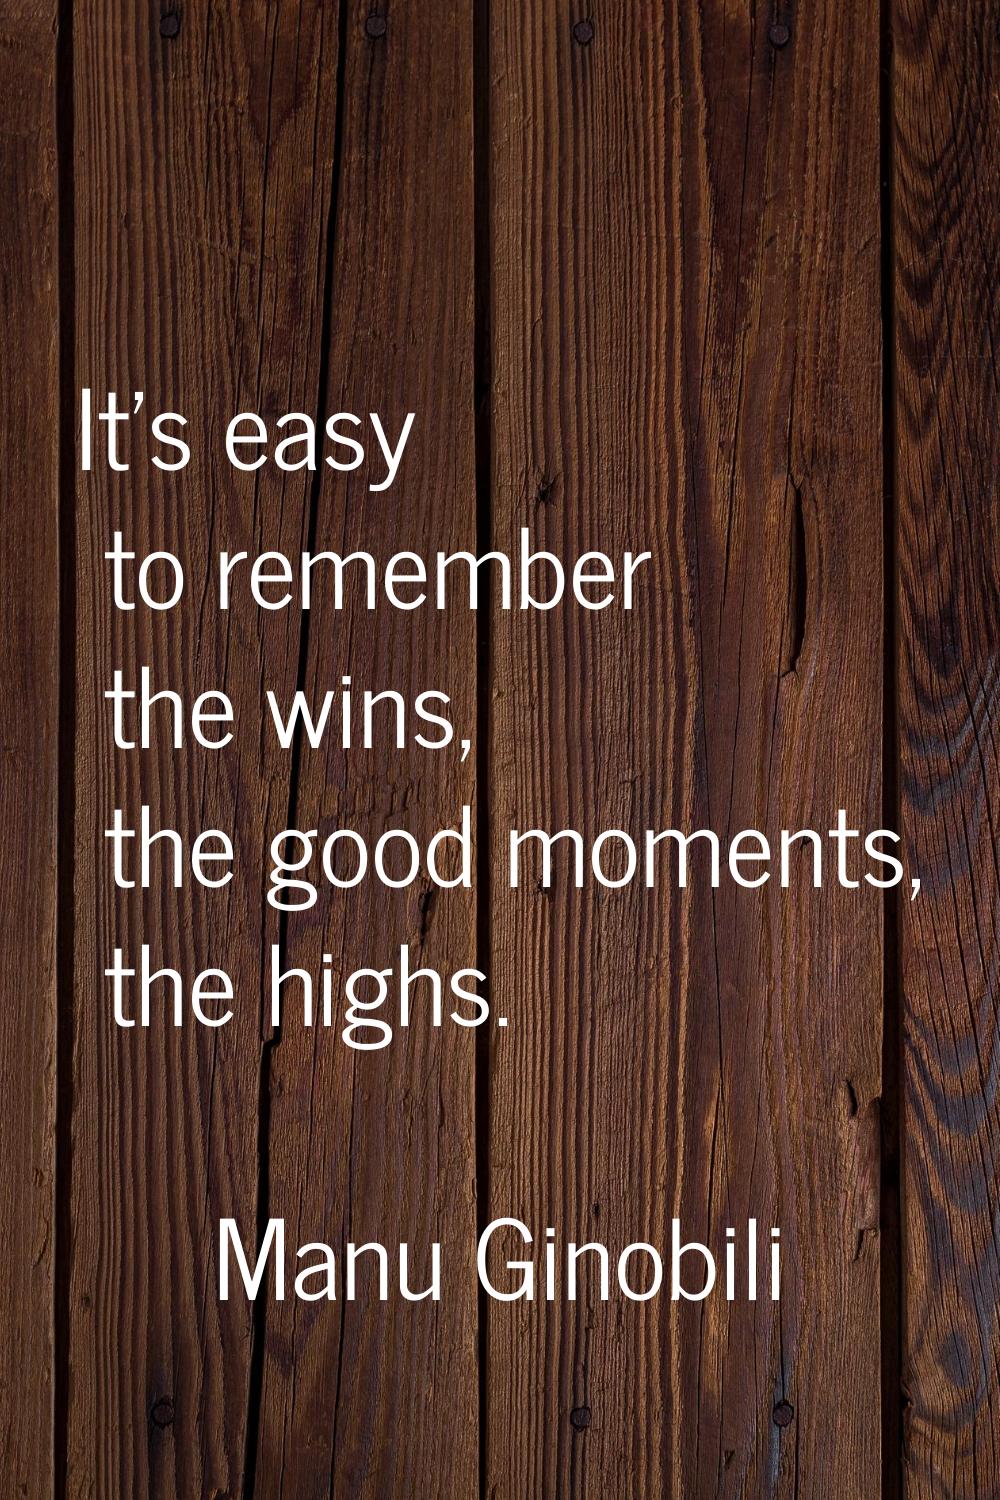 It's easy to remember the wins, the good moments, the highs.